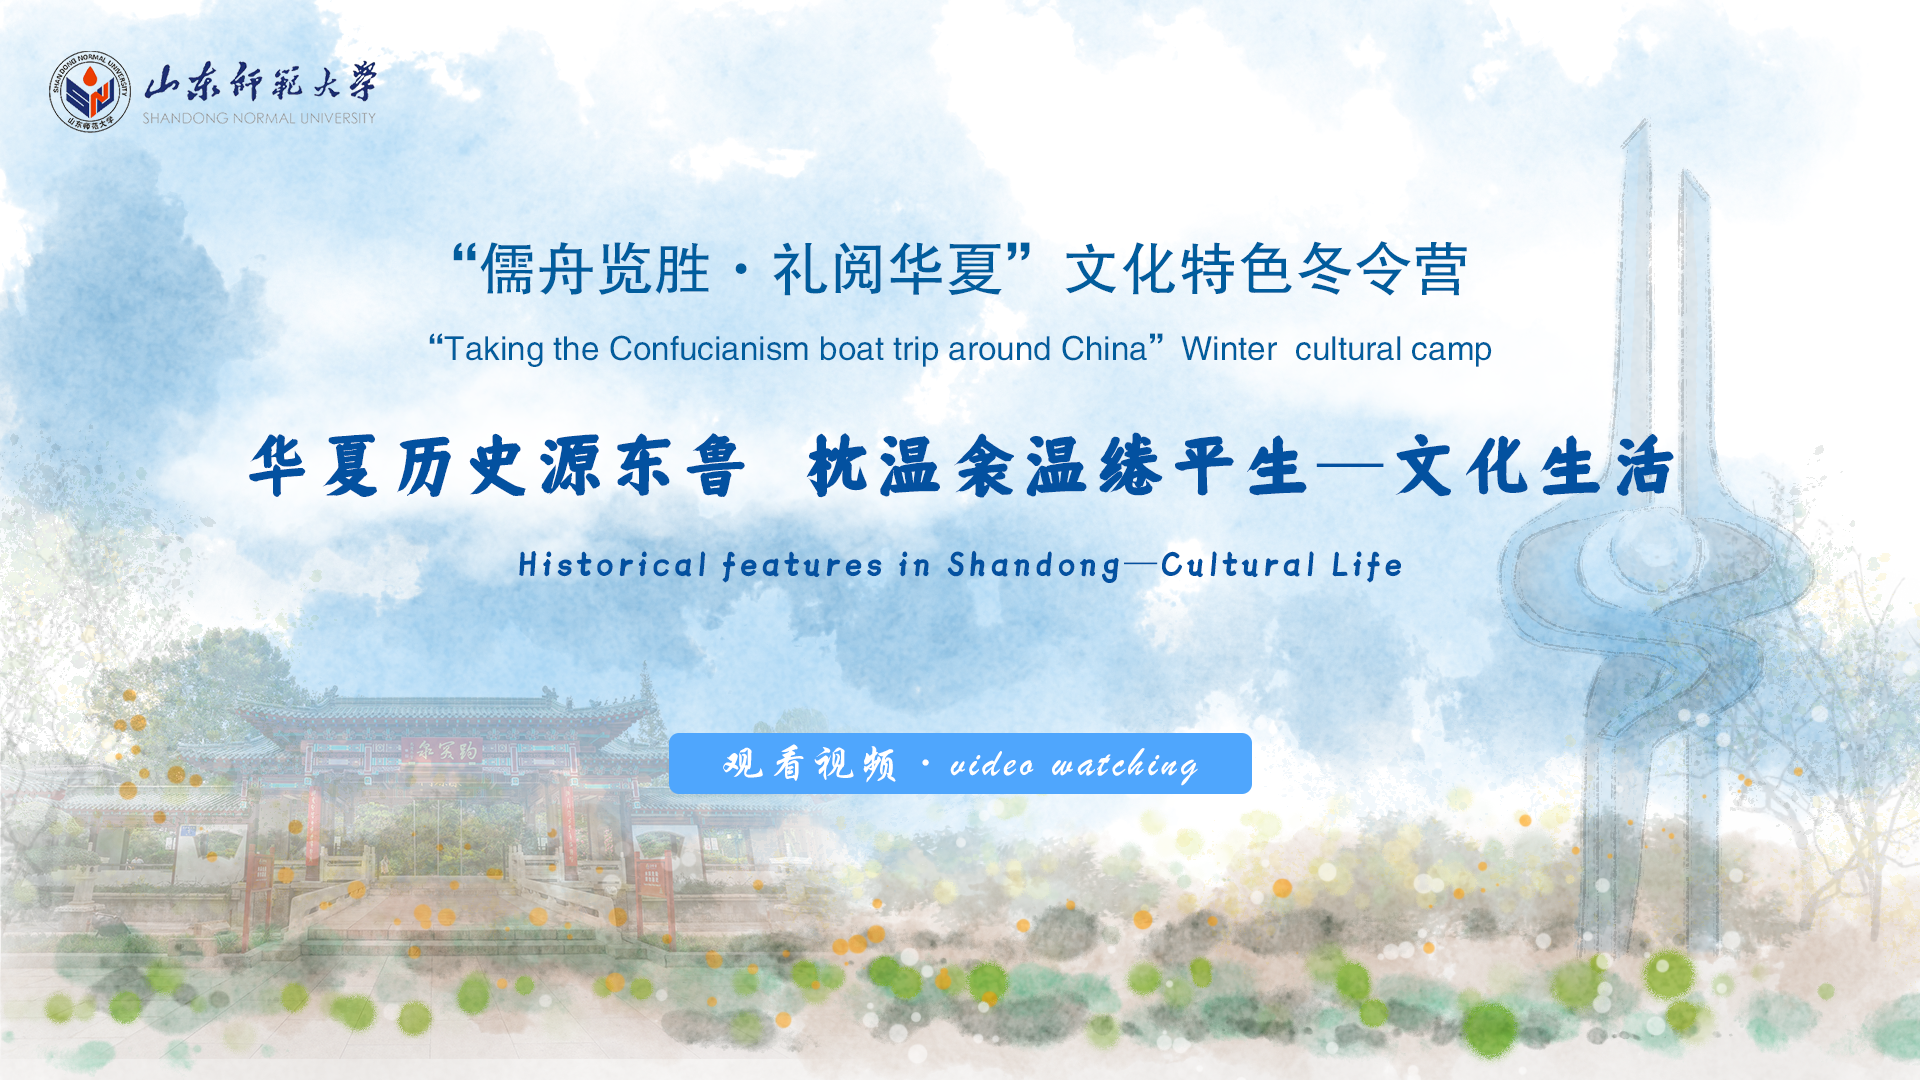 Historical features in Shandong—Cultural Life